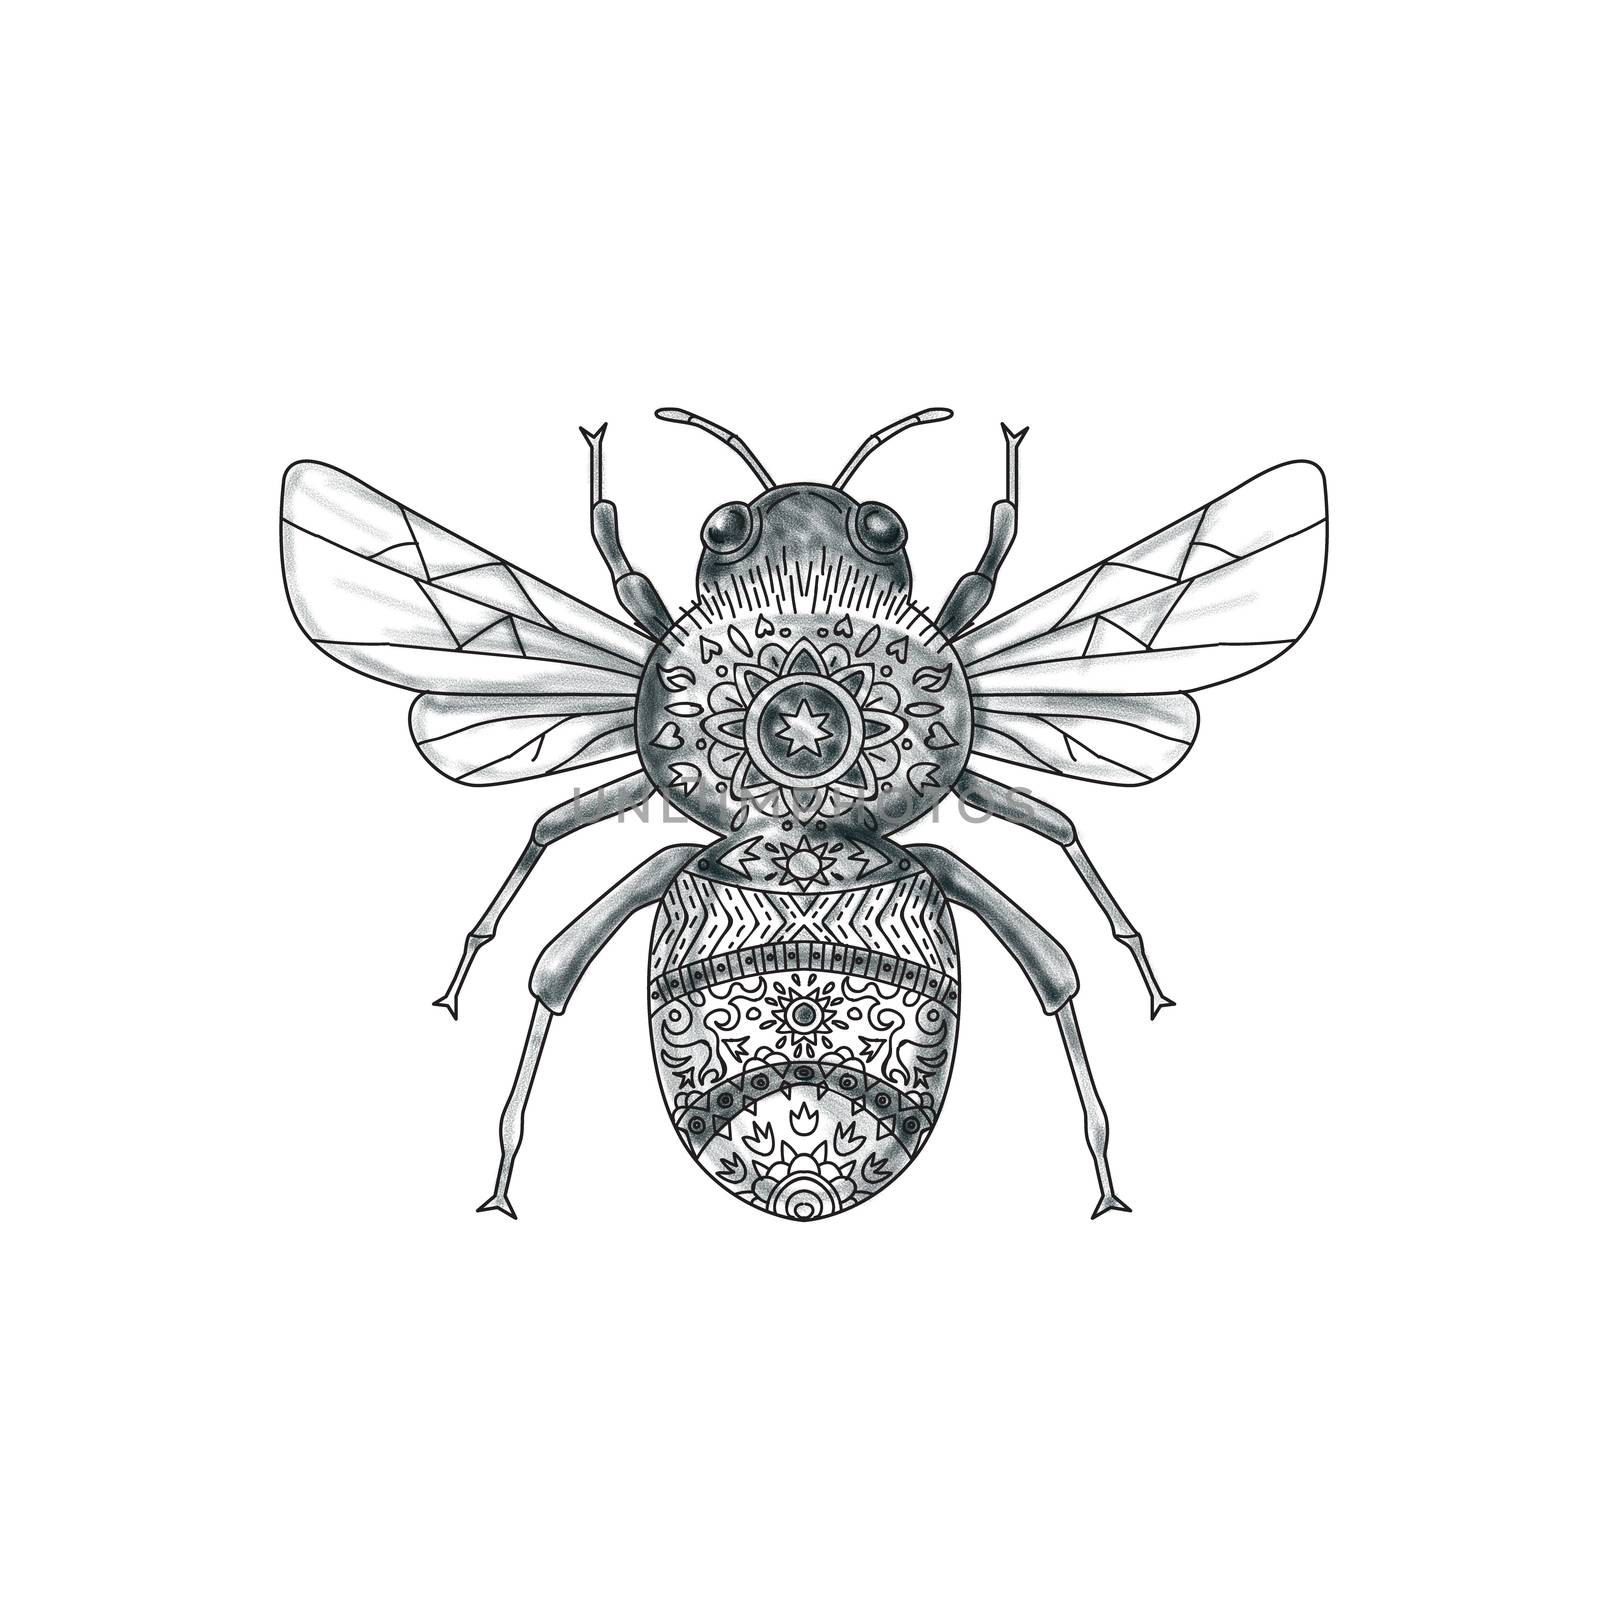 Tattoo style illustration of a bumblebee or bumble bee, a member of the genus Bombus, part of Apidae, one of the bee families set on isolated white background. 